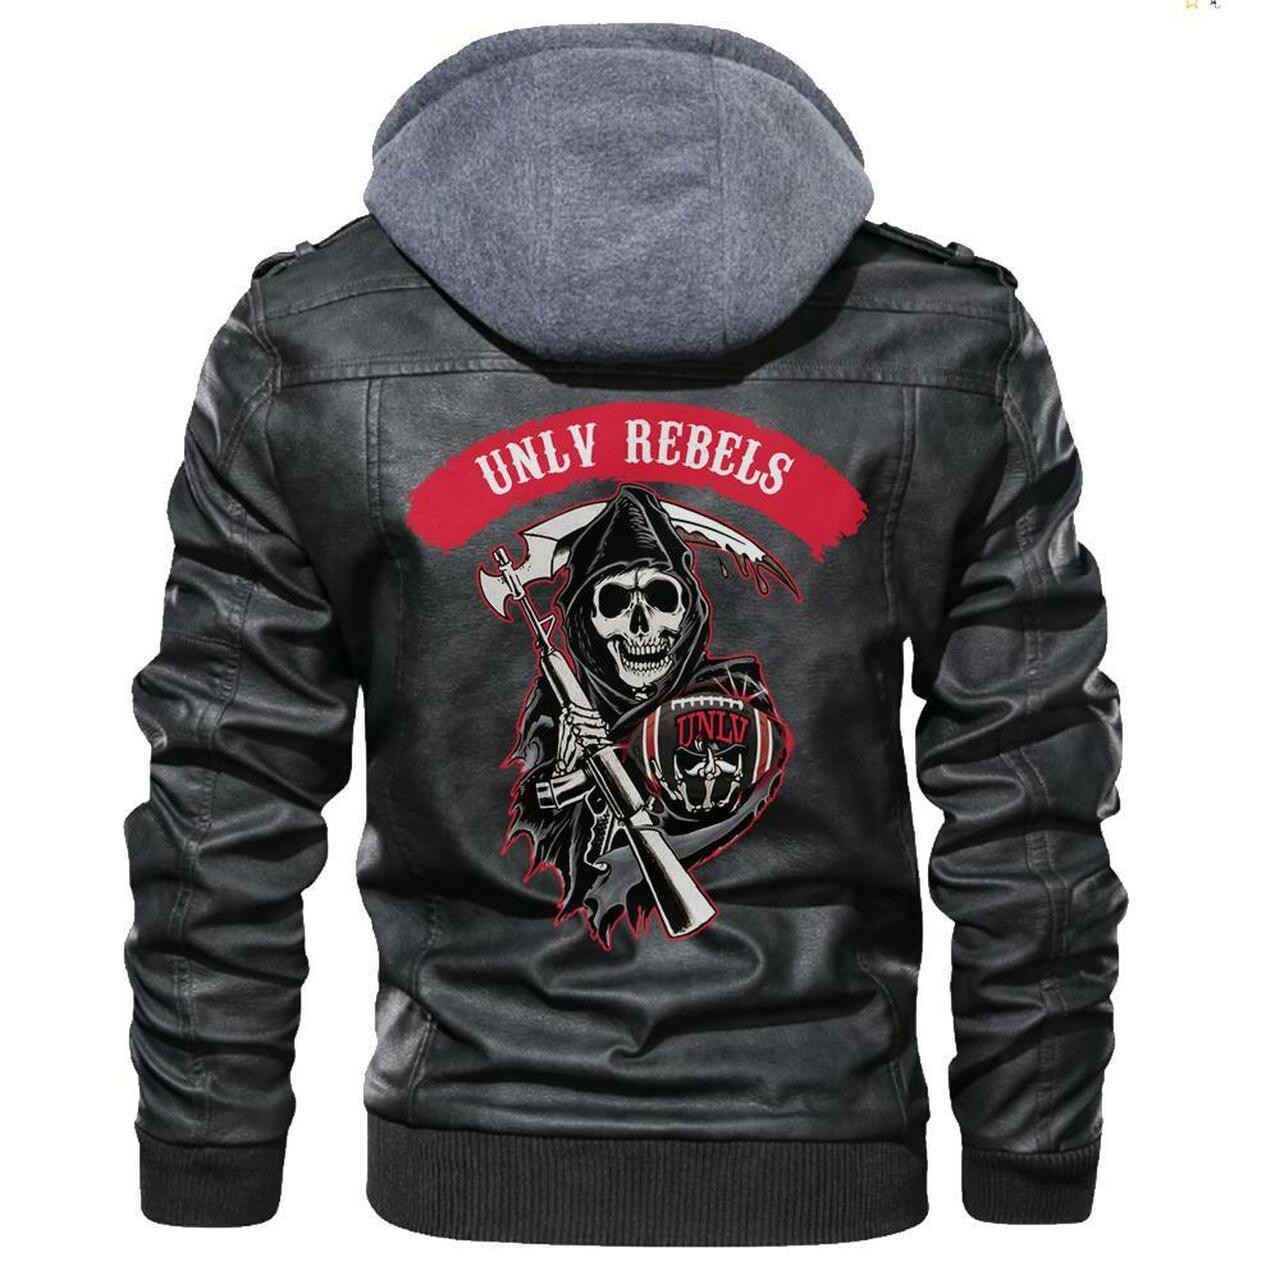 Our store has all of the latest leather jacket 31